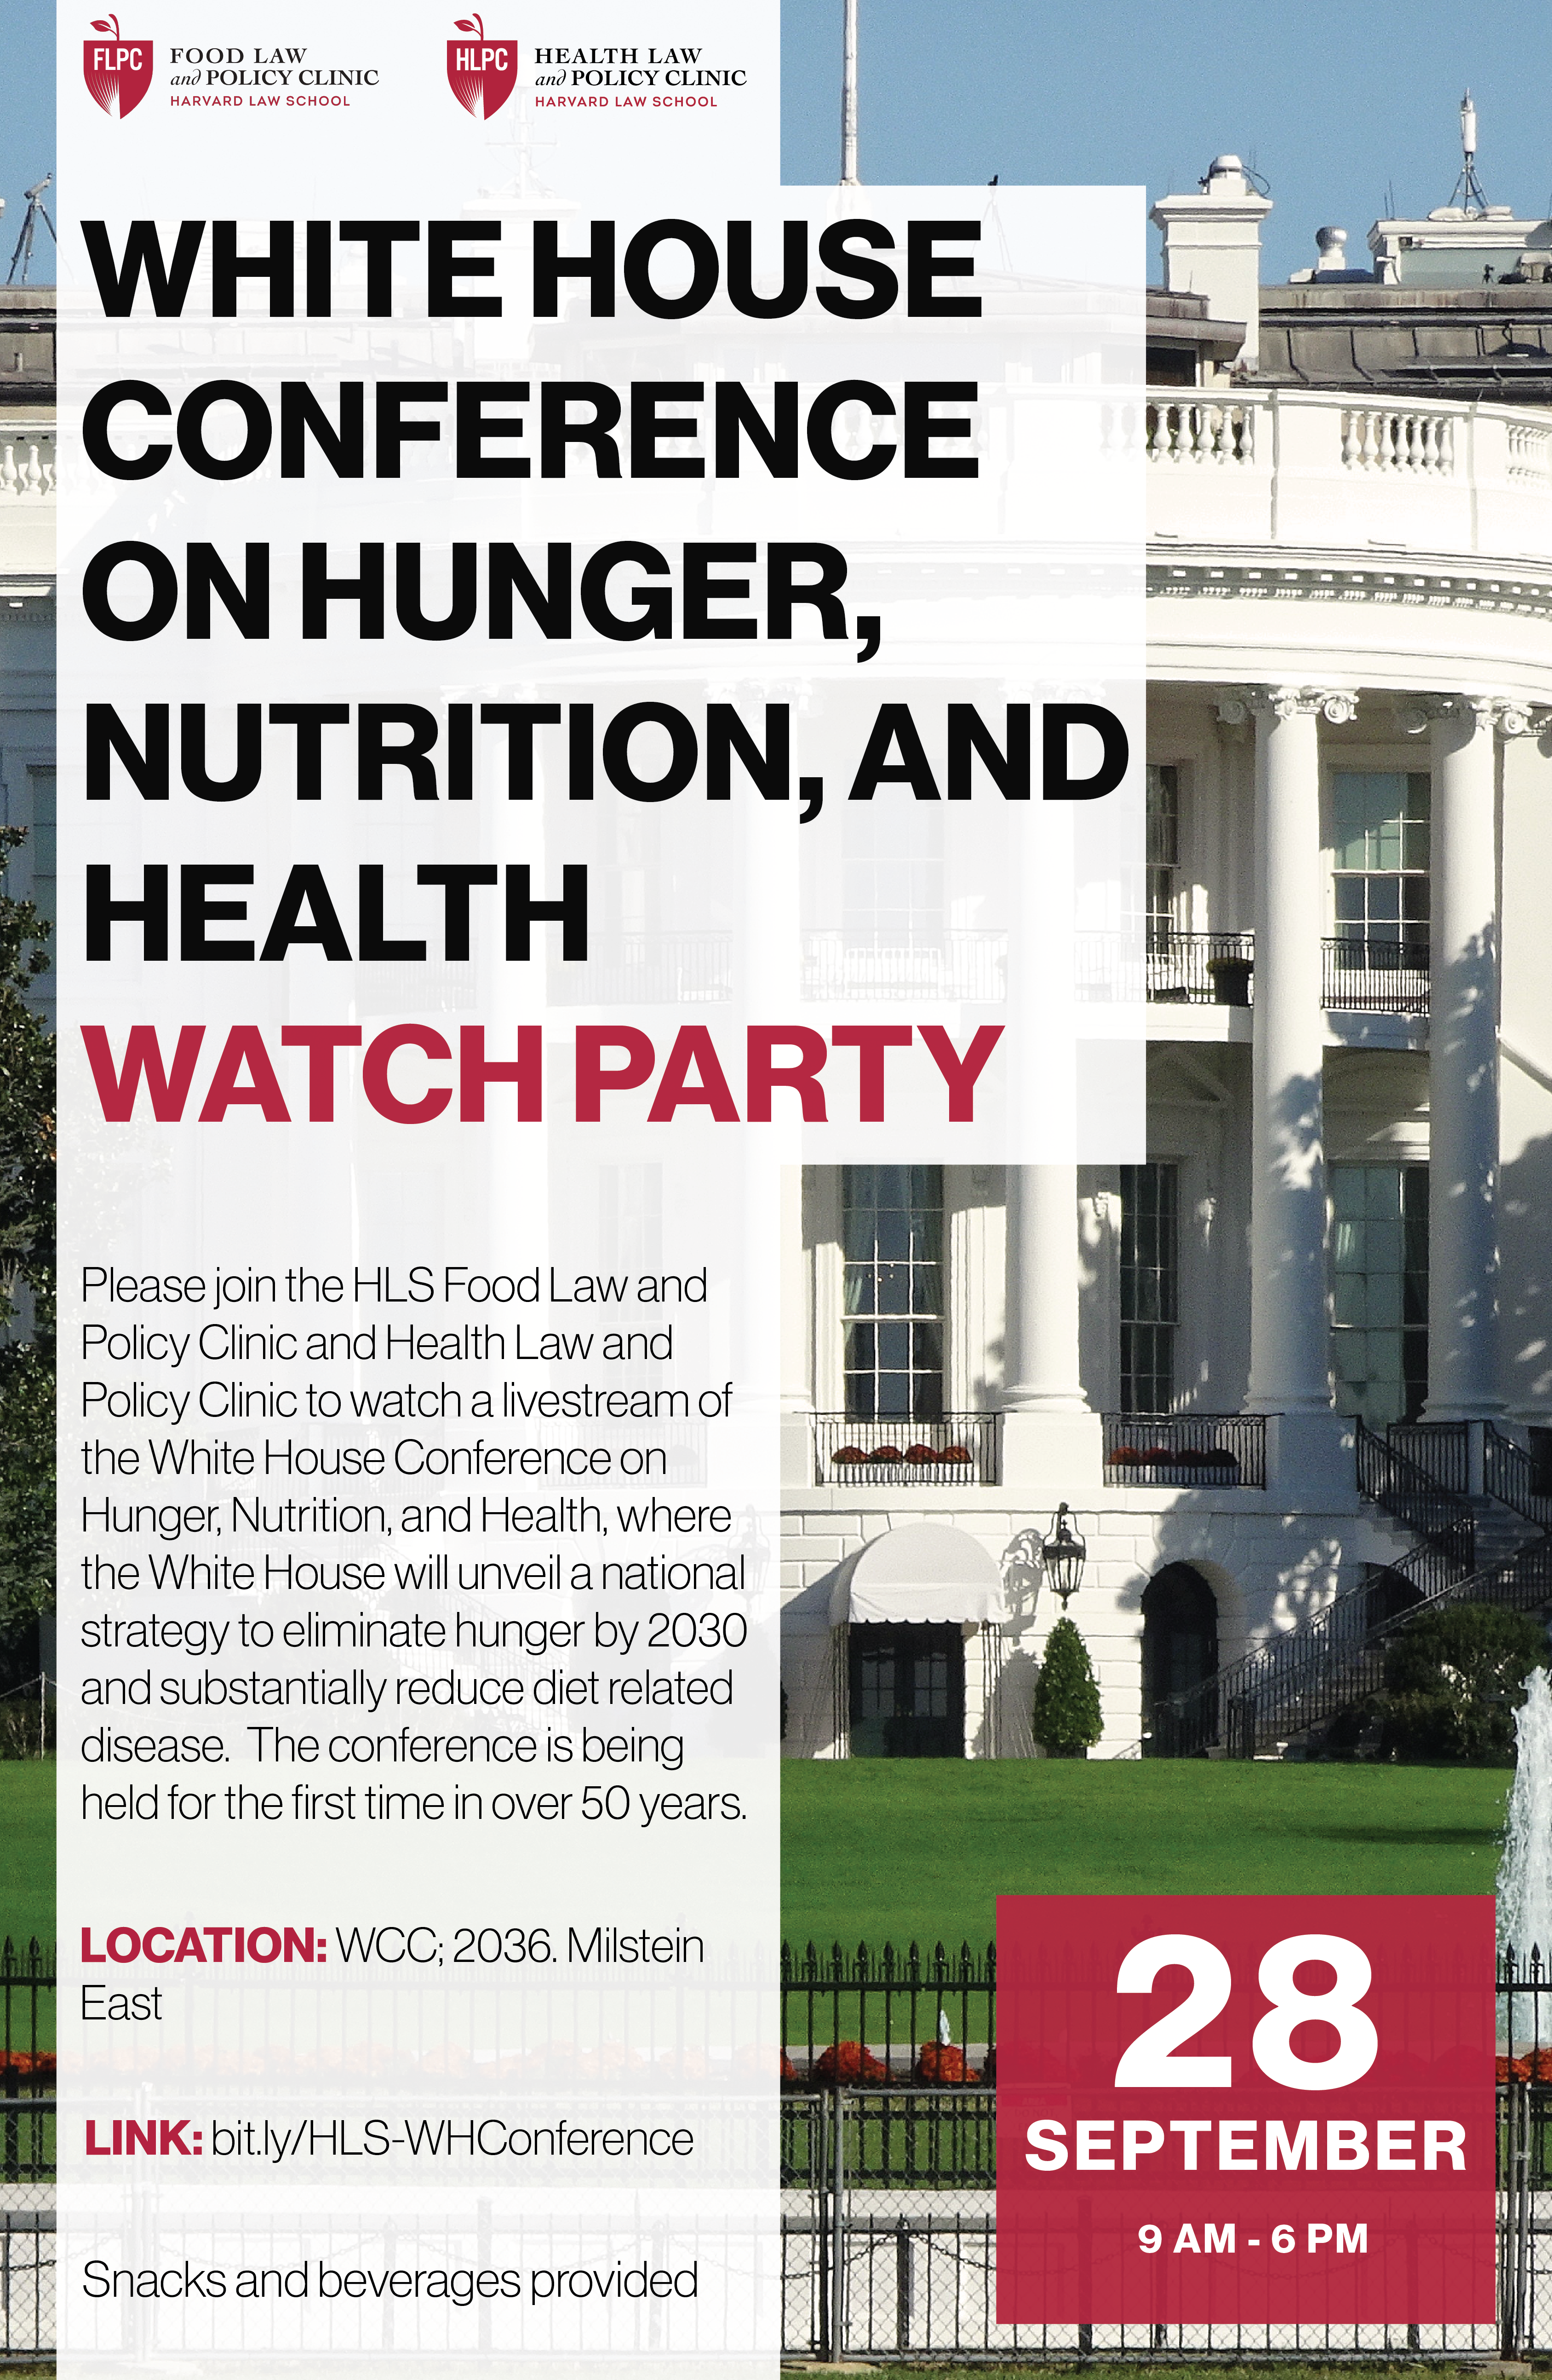 White House image with event details